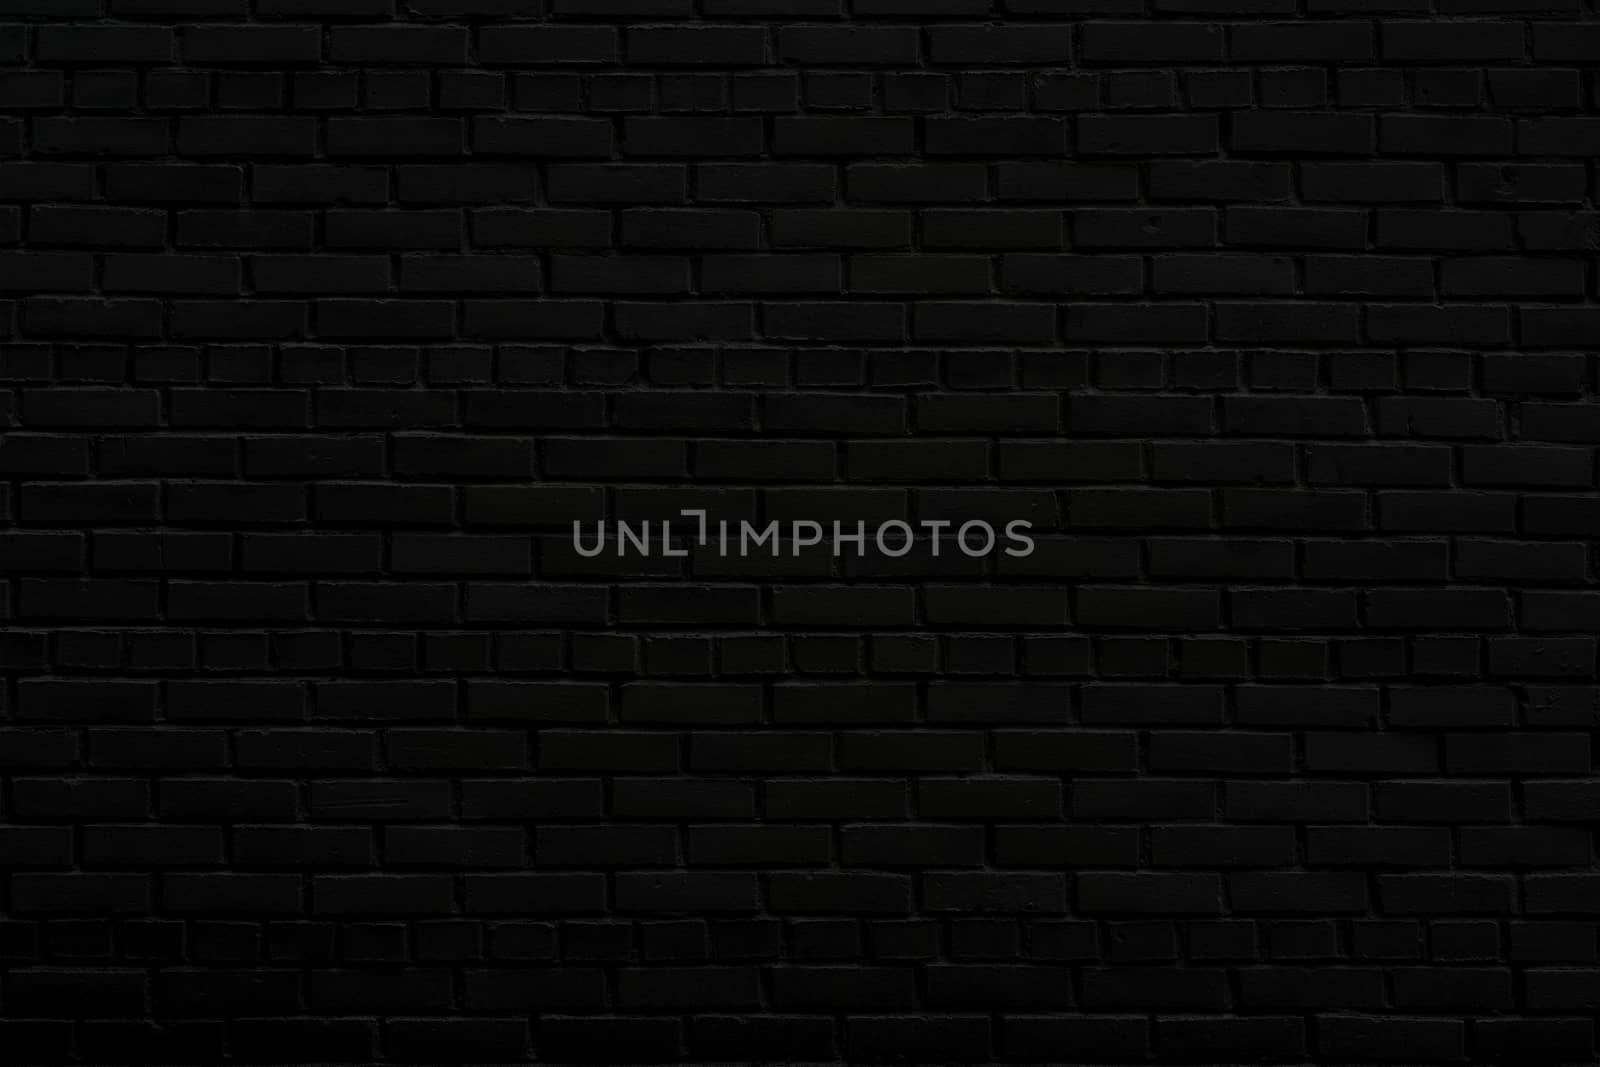 The black wall of the house. Old brick wall. Black paint on a brick wall.